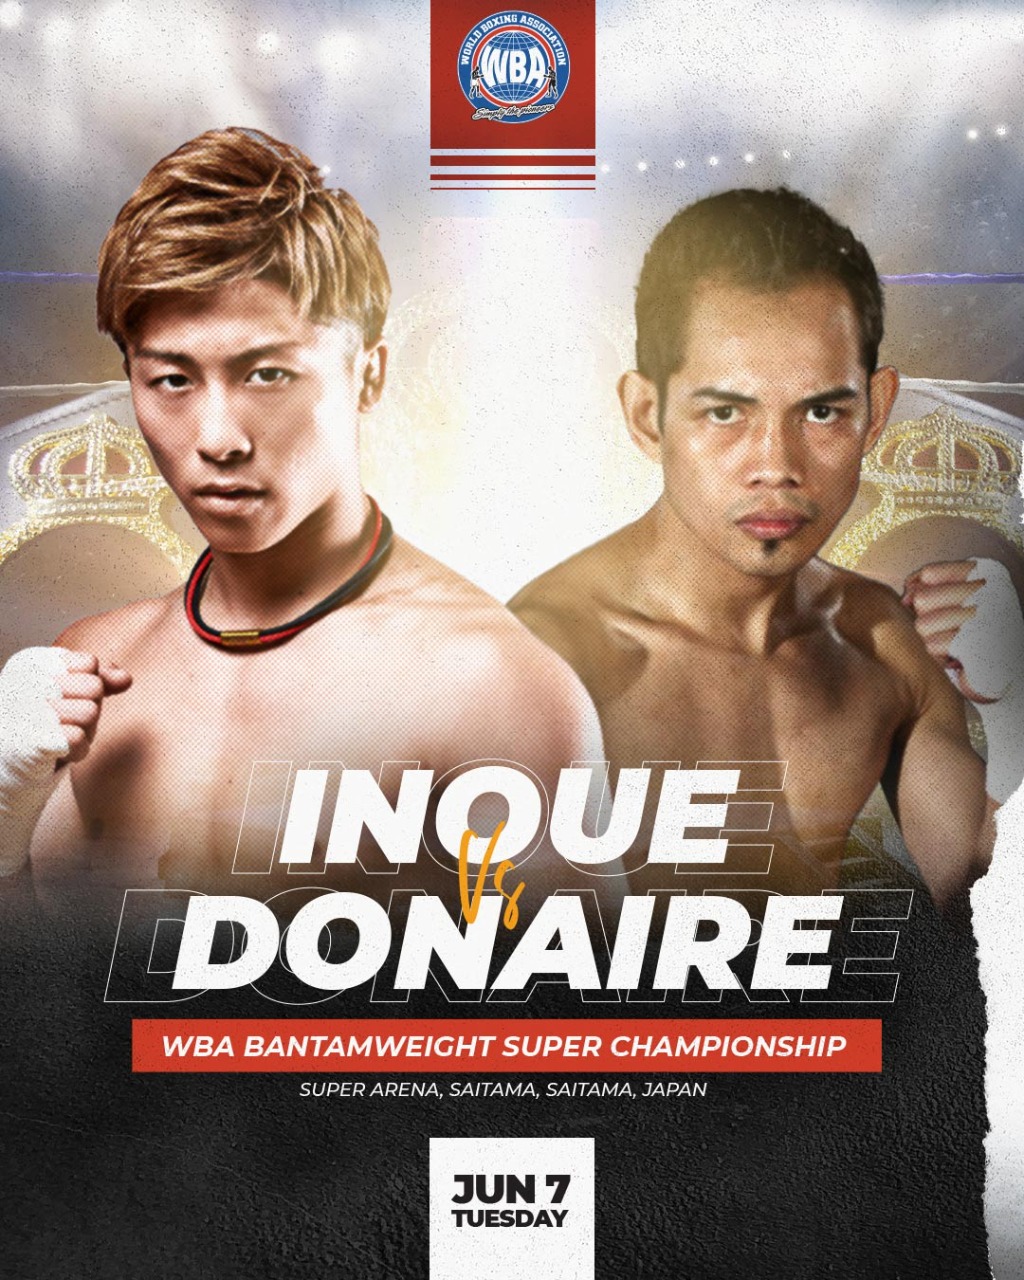 Drama in Saitama 2 Inoue and Donare for their second fight